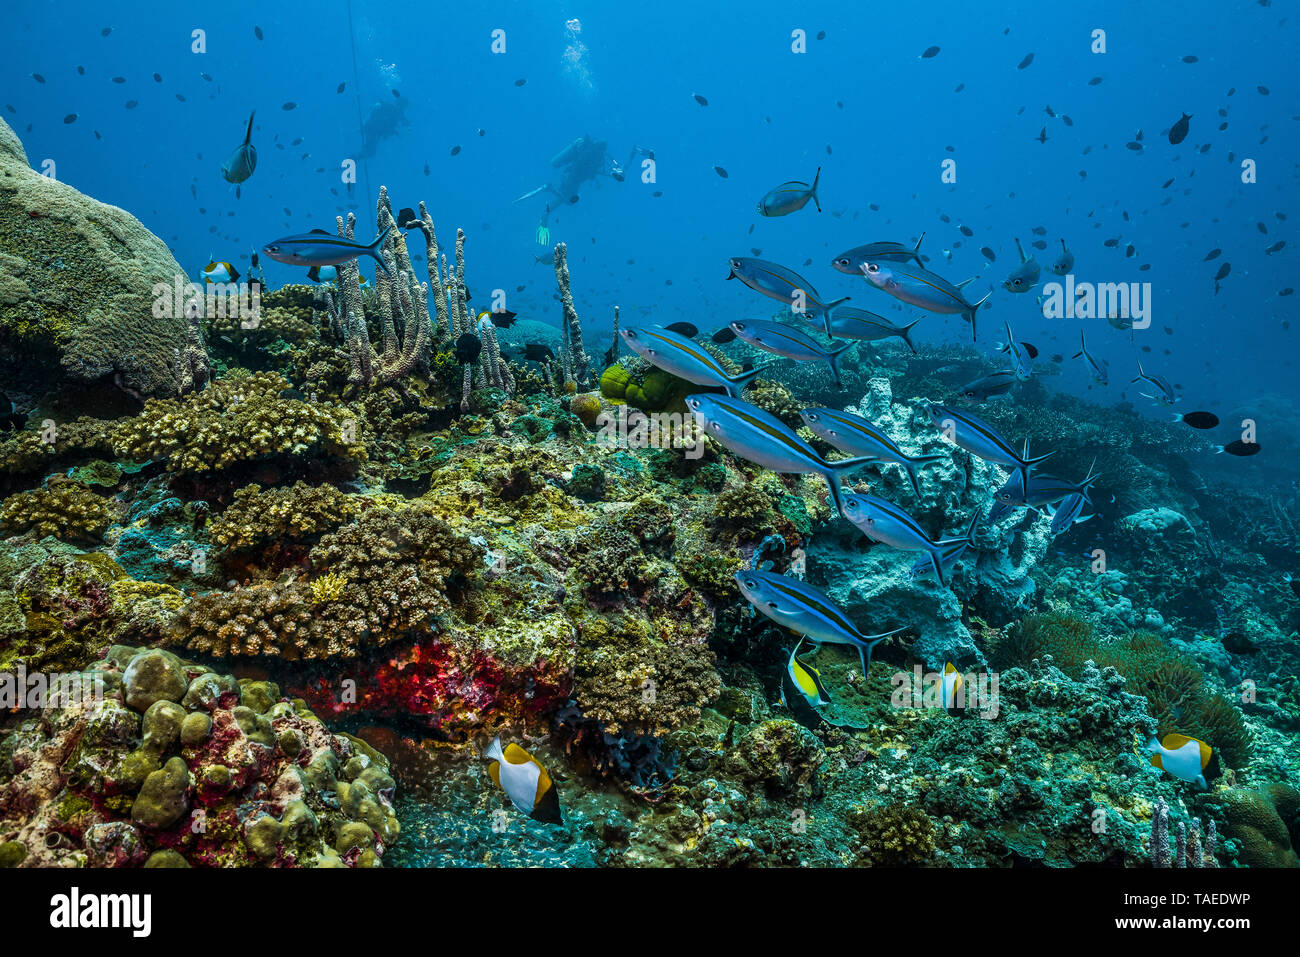 Tara Pacific expedition - november 2017 Inglis Shoal seamount, Kimbe Bay, Papua New Guinea, Marine life on a partly bleached reef crest. Fusiliers and other reef fish. D: 20 m Stock Photo